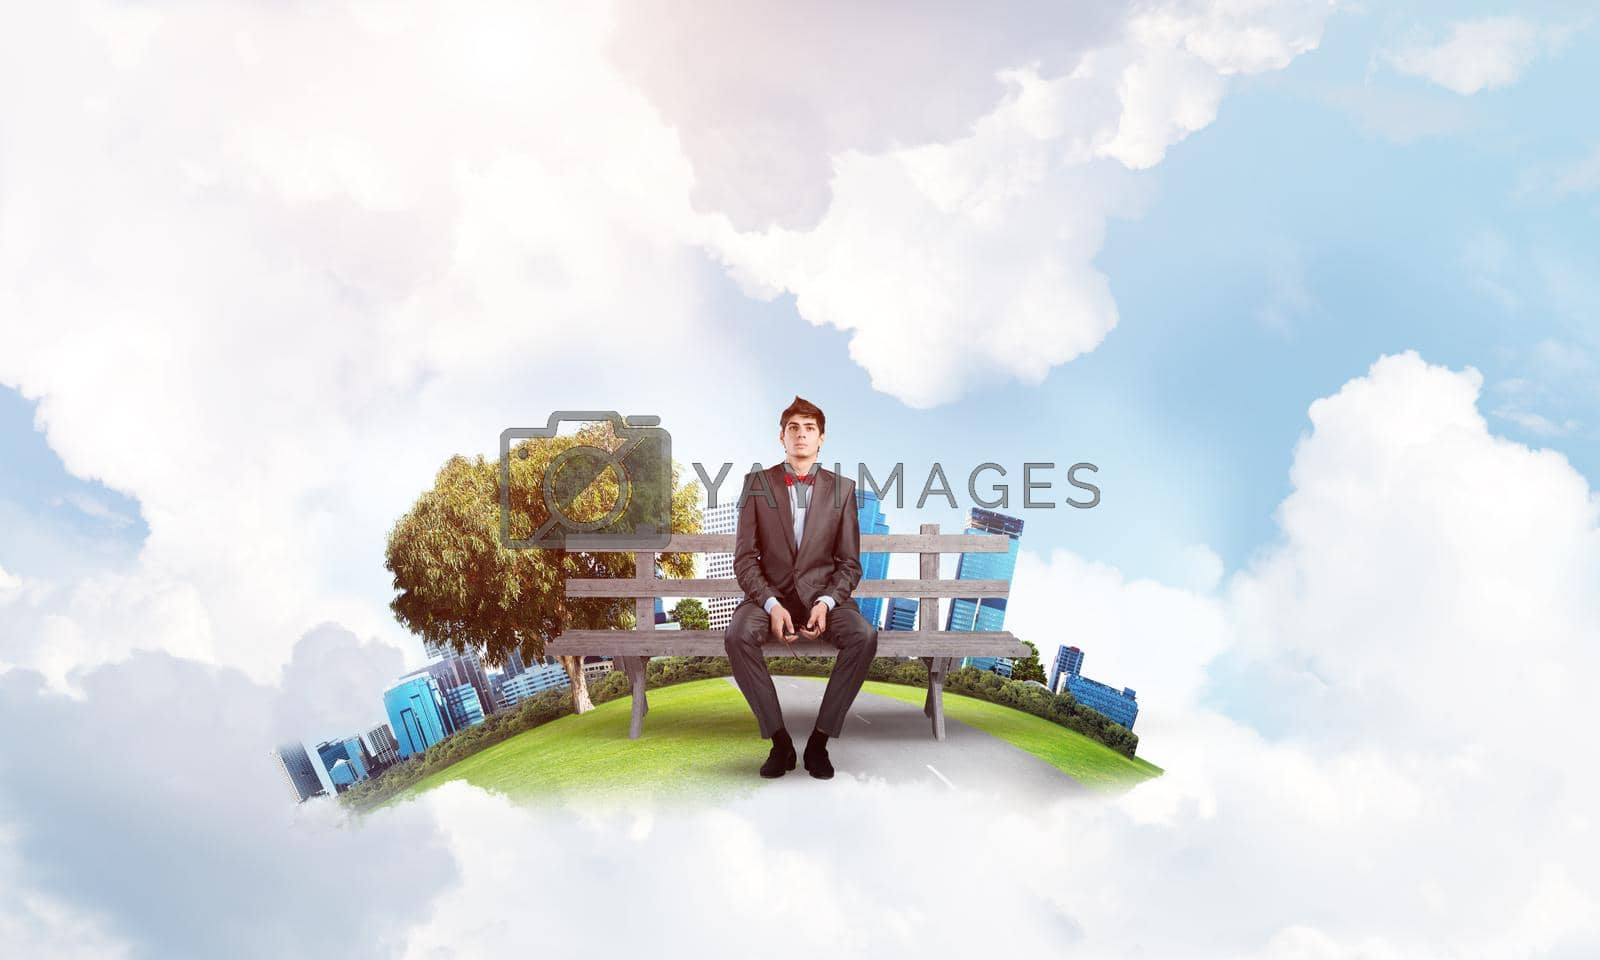 Royalty free image of young student on a bench by adam121